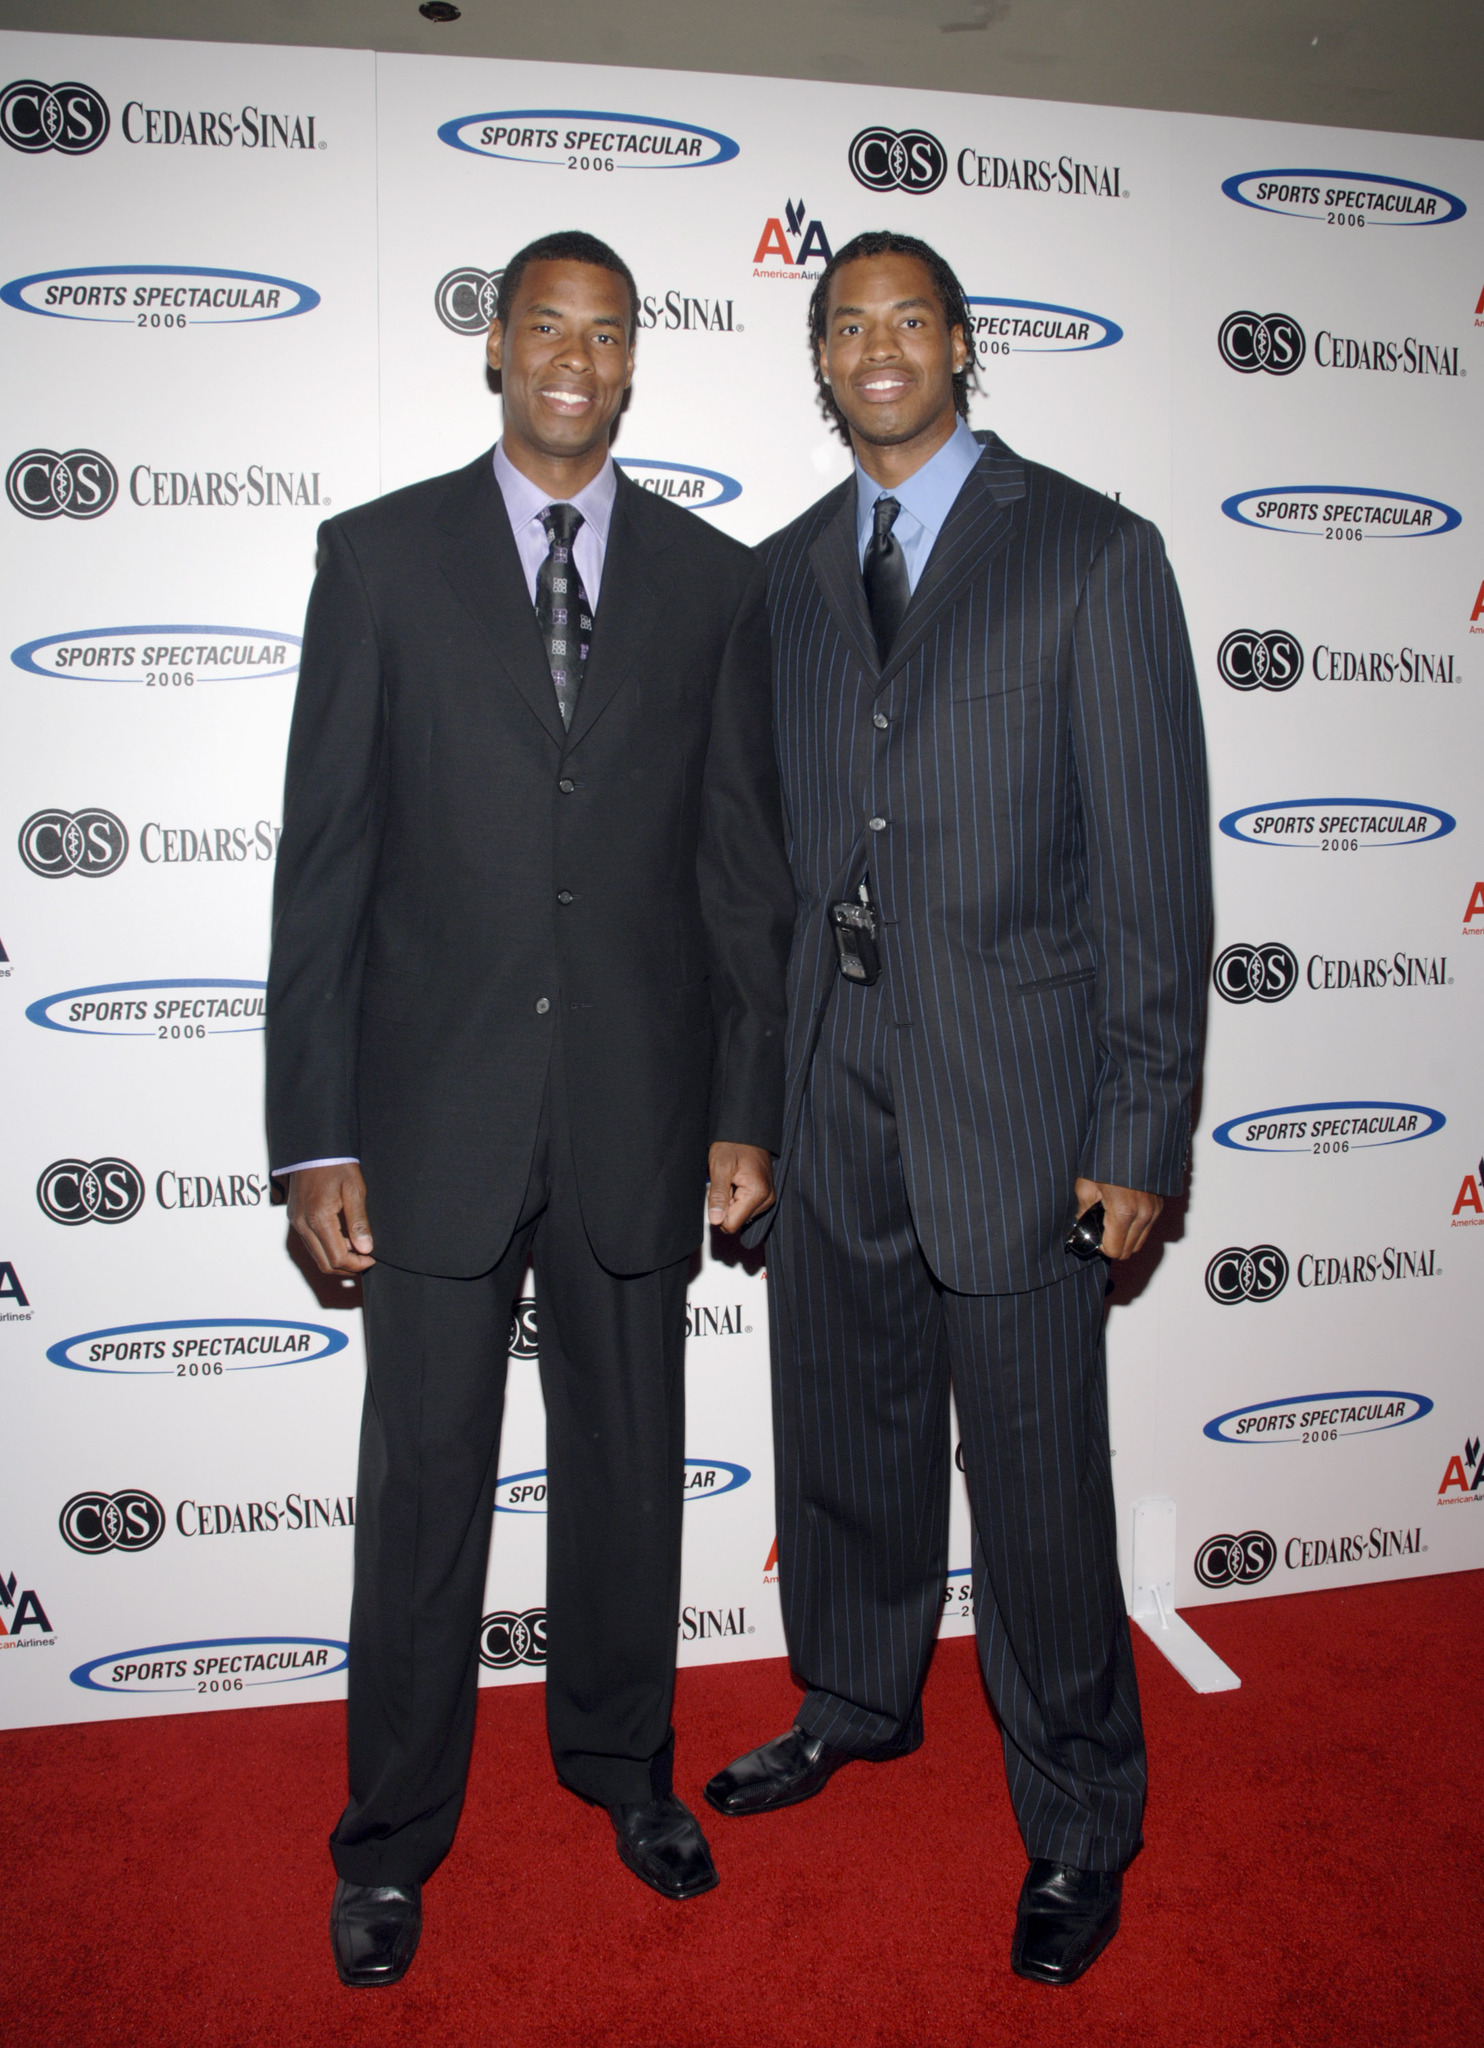 Jarron Collins and Jason Collins arrive at the Cedars-Sinai Medical Center's 21st Annuel Sports Spectacular at the Hyatt Regency Century Plaza Hotel in Century City, CA.